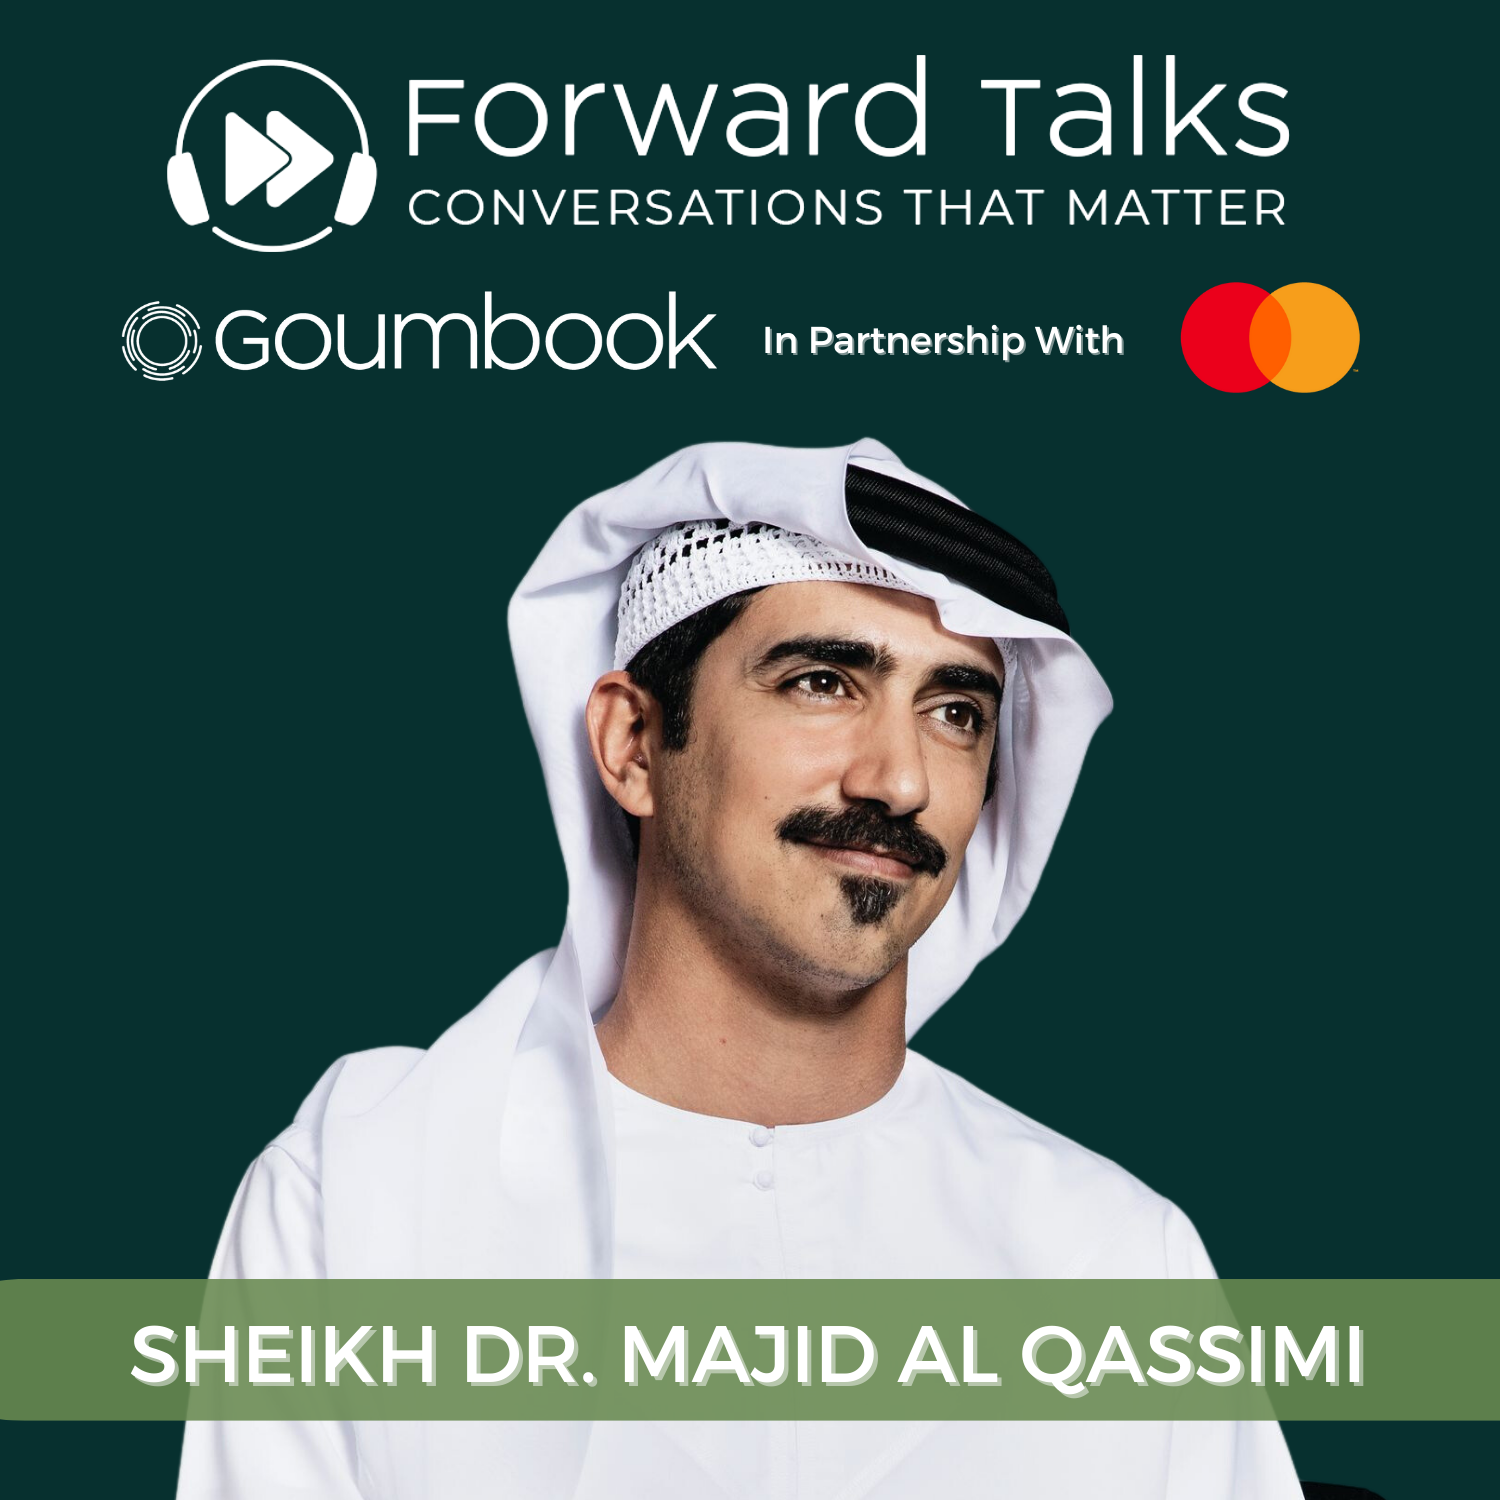 Sheikh Dr. Majid Al Qassimi on the nexus between soil health and food security